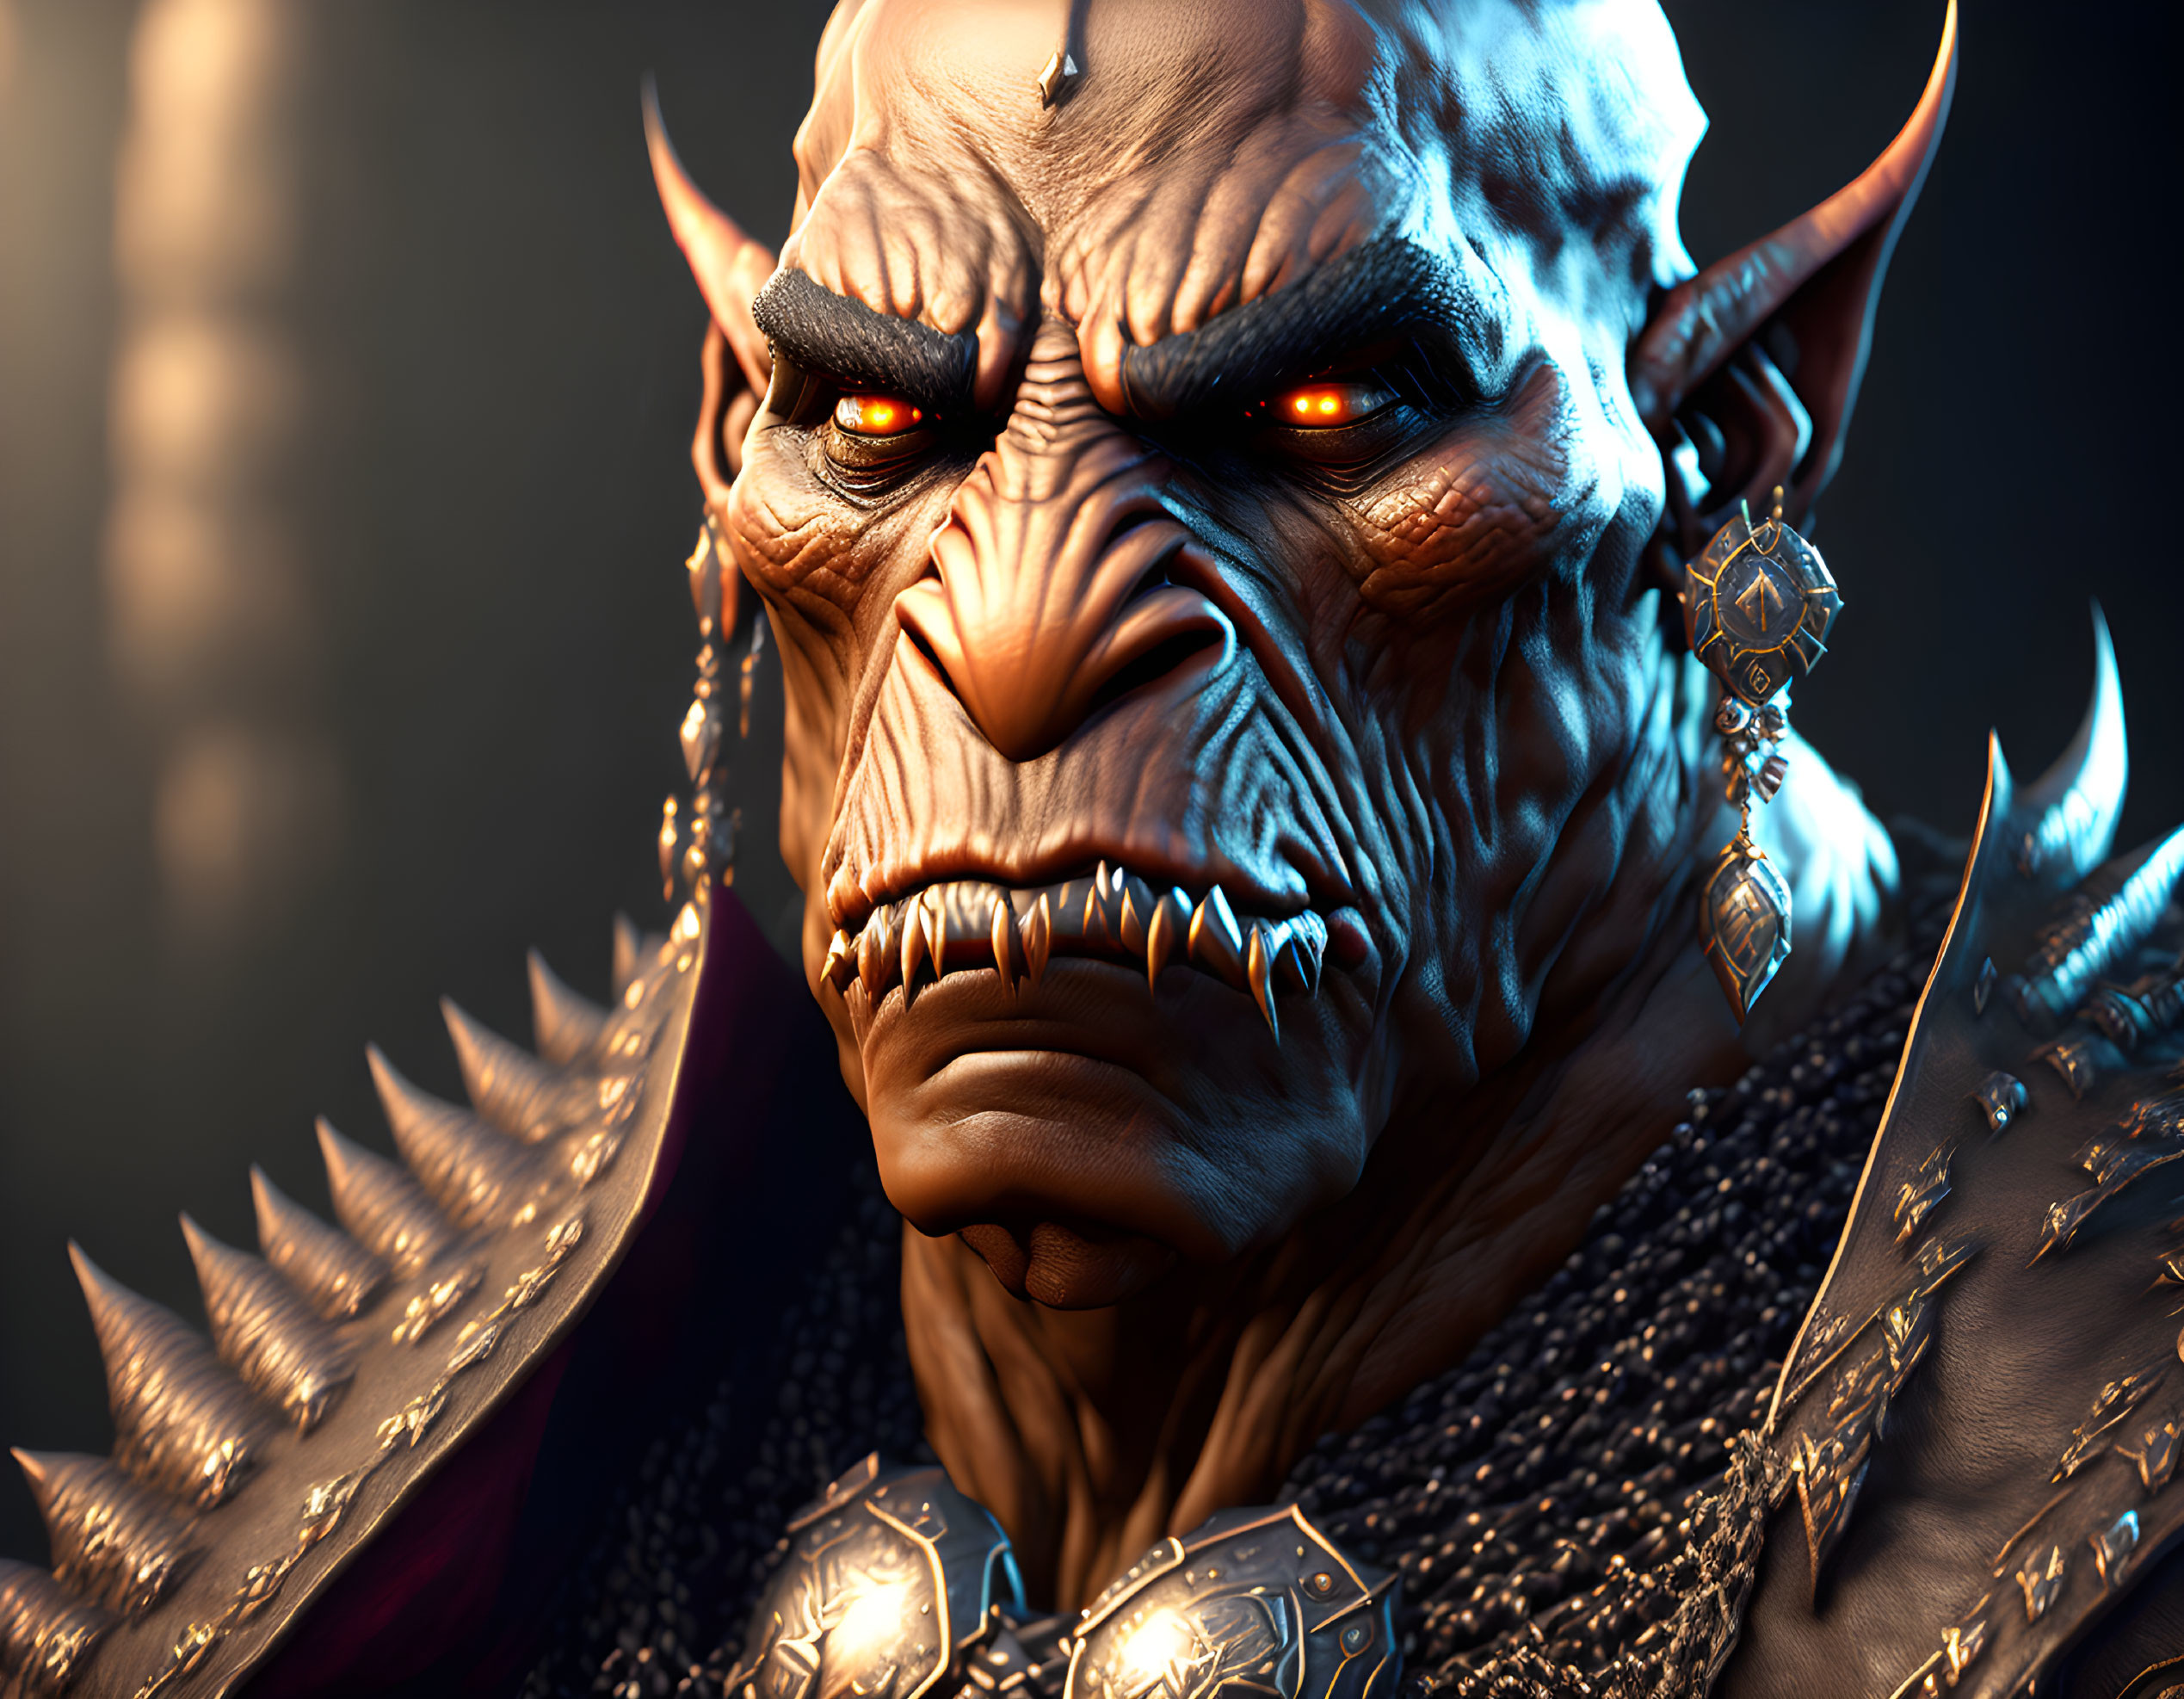 Detailed 3D illustration of menacing orc with glowing red eyes, pierced ears, heavy armor, spikes